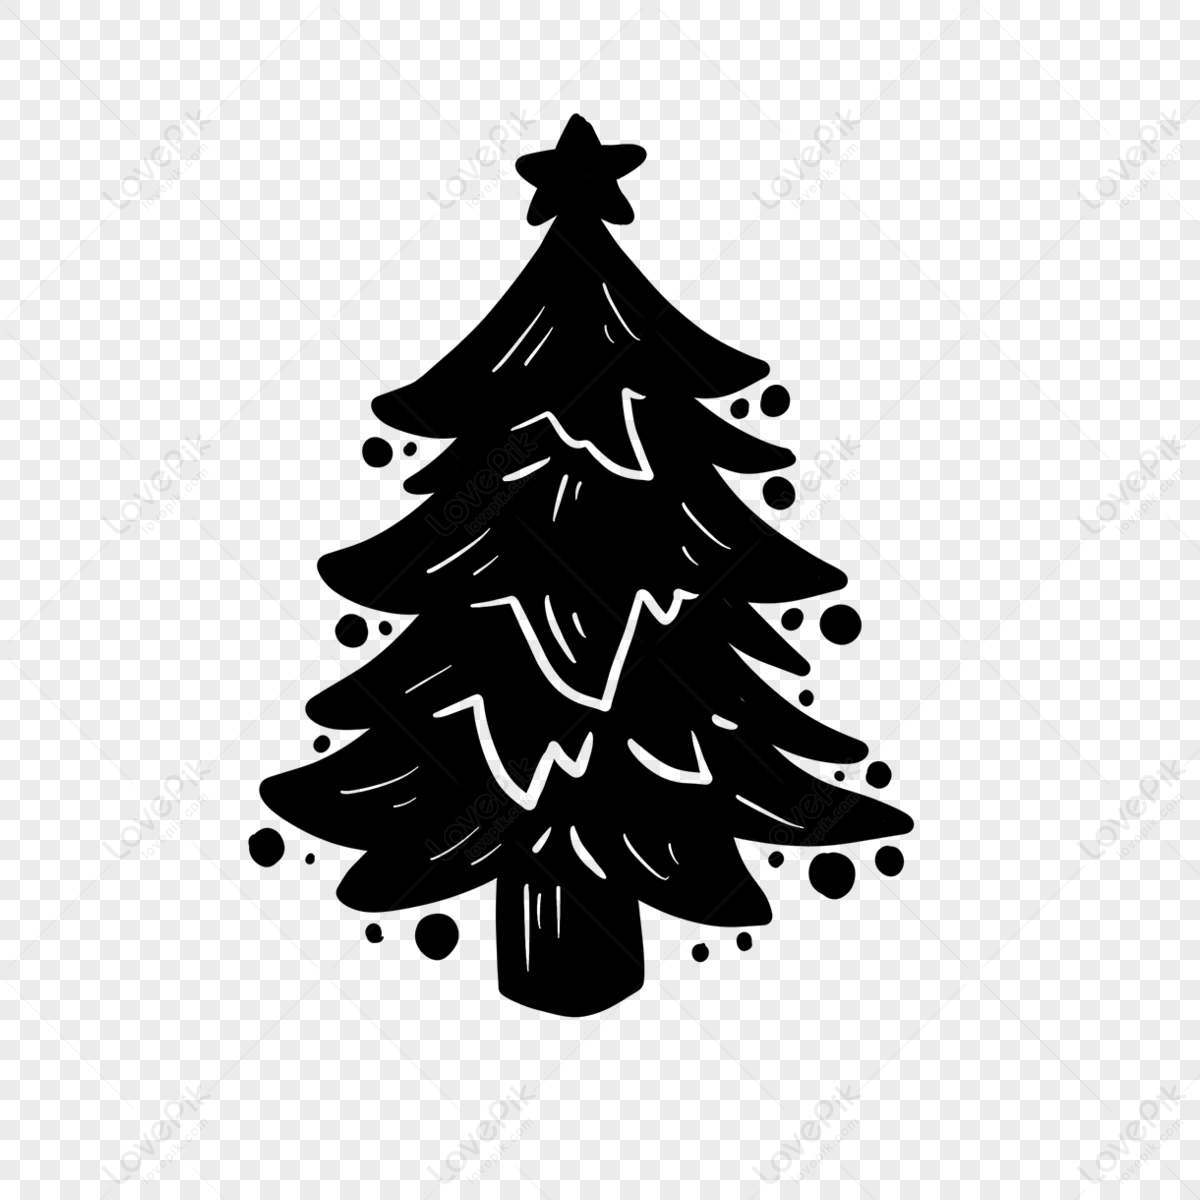 Decorative stars Christmas tree silhouette clip art, Christmas Tree Silhouette,  Christmas Tree,  Silhouette png image